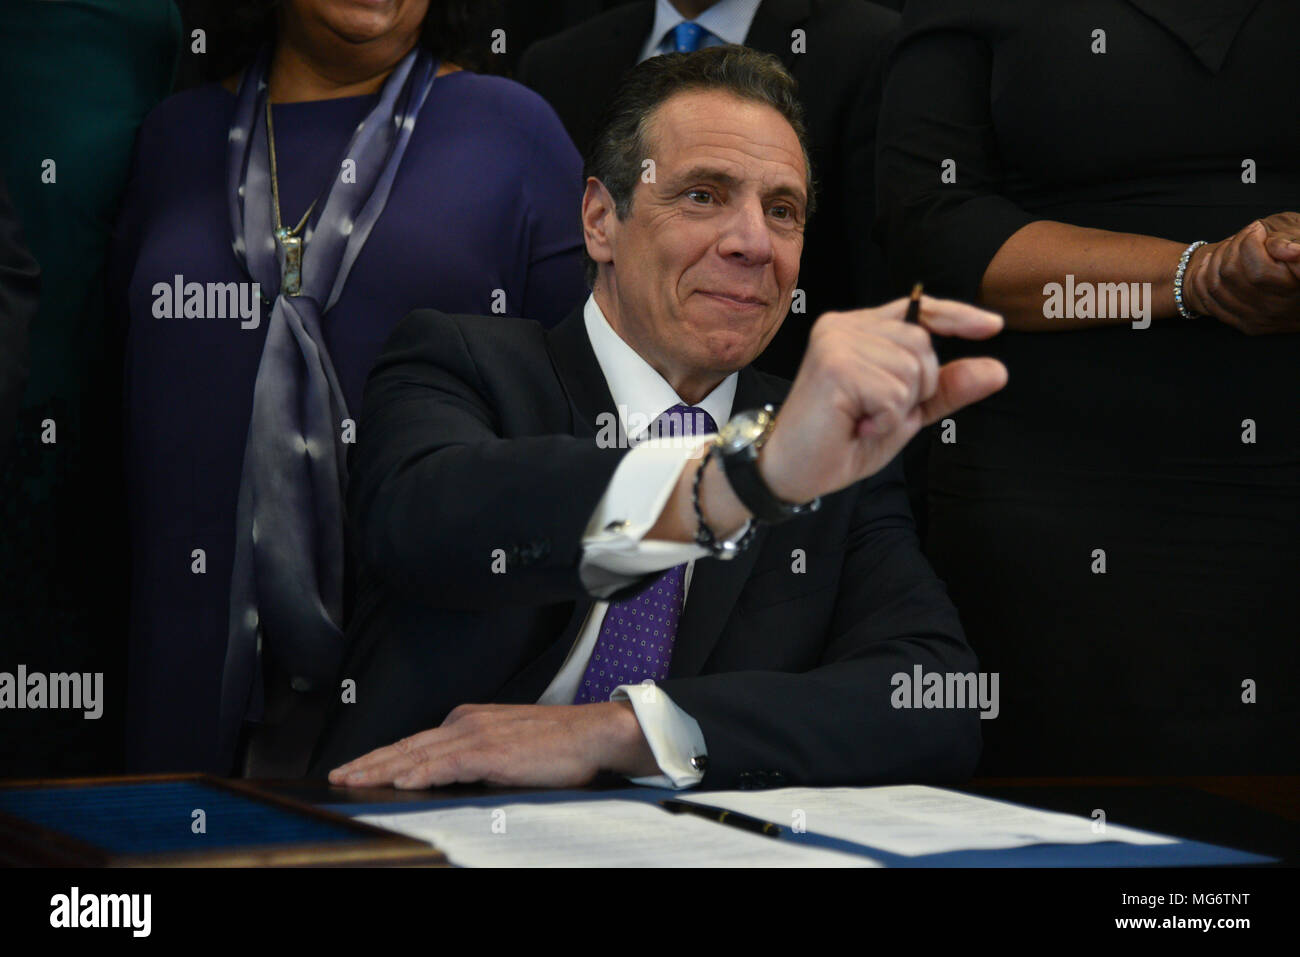 New York, USA. 26th April 2018. Governor Andrew Cuomo announces the Vital Brooklyn initiative which seeks to bring affordable housing and health care  to central Brooklyn on April 26, 2018 in New York. Credit: Erik Pendzich/Alamy Live News Stock Photo